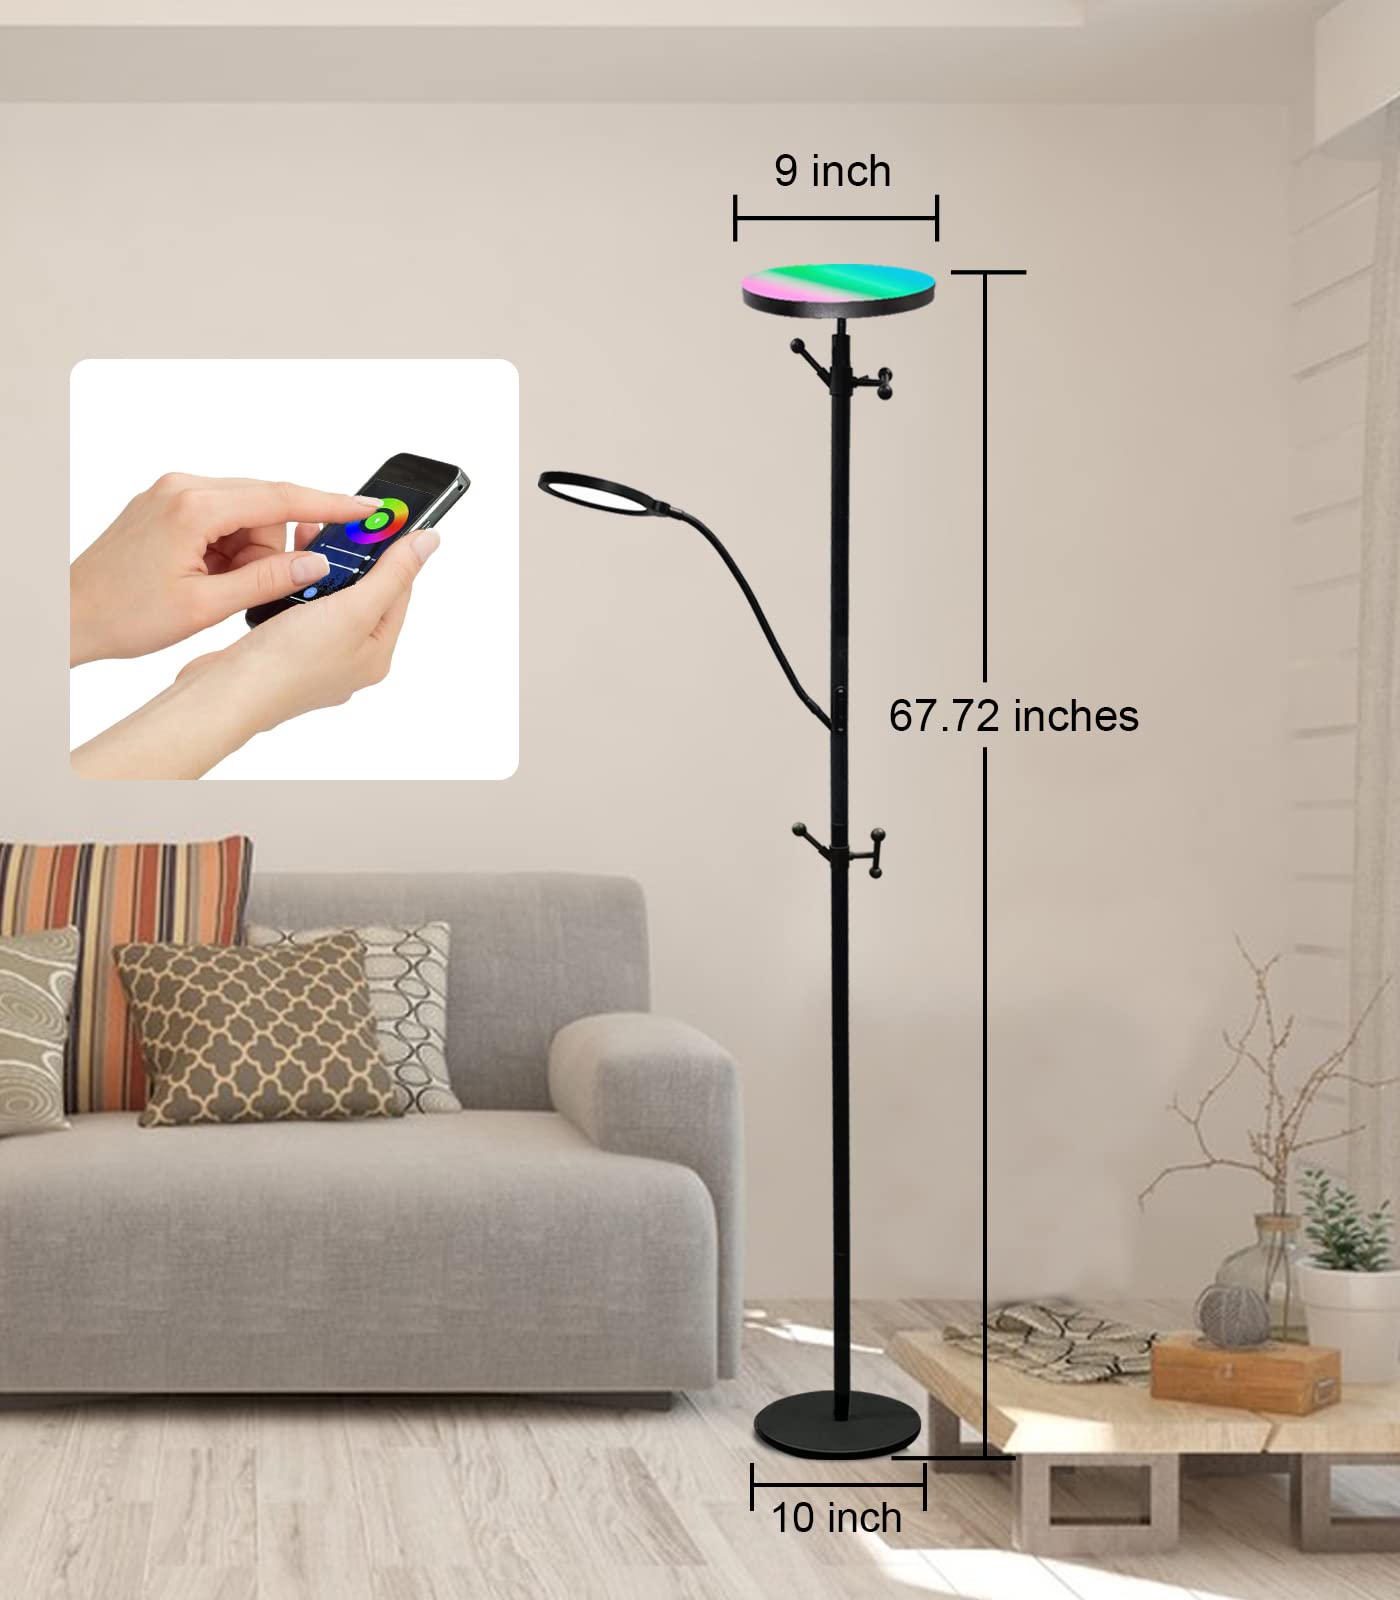 Ovensty RGB Coat Rack Floor Lamp,LED Bright Modern Corner Floor Lamps with Reading Light,Color Changing & Dimmable Smart APP & Remote Control Tall Standing Lights for Living Room,Bedroom,Office(Black)